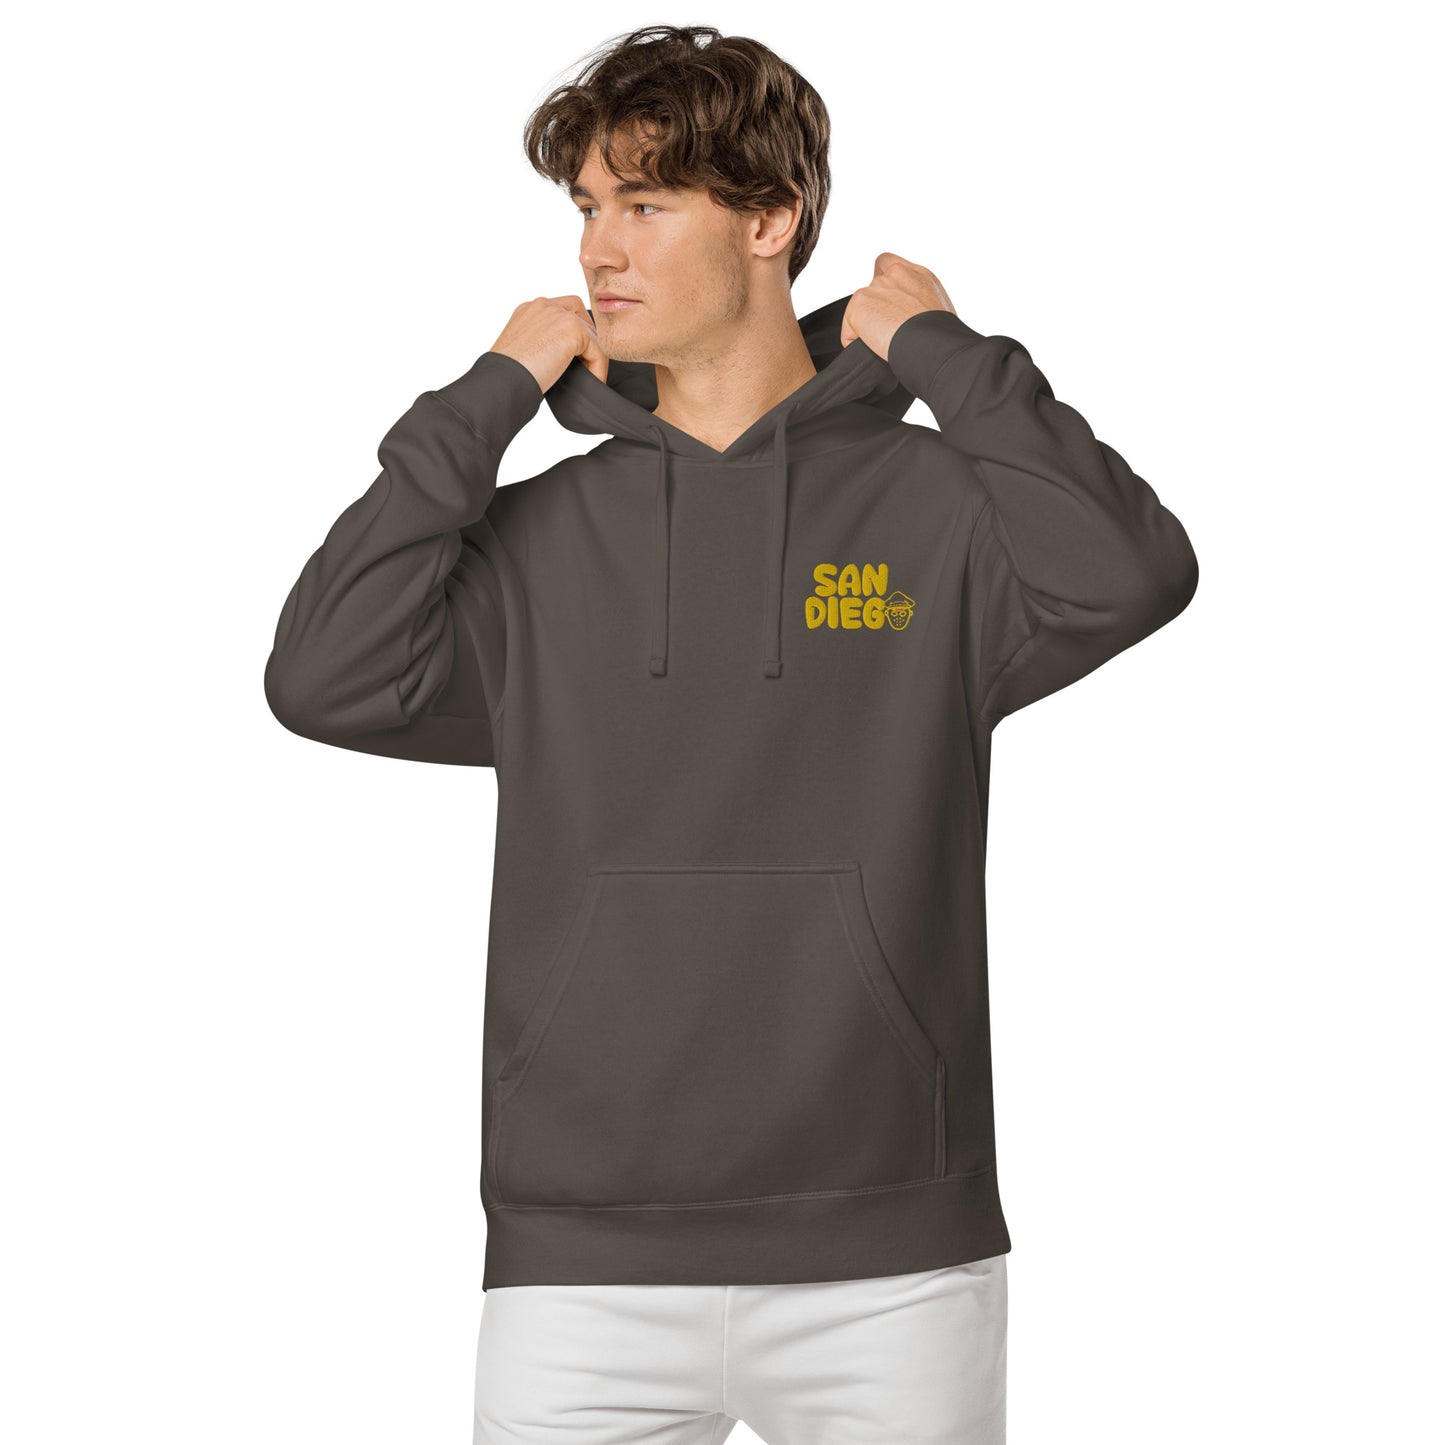 San Diego Embroidered Hoodie